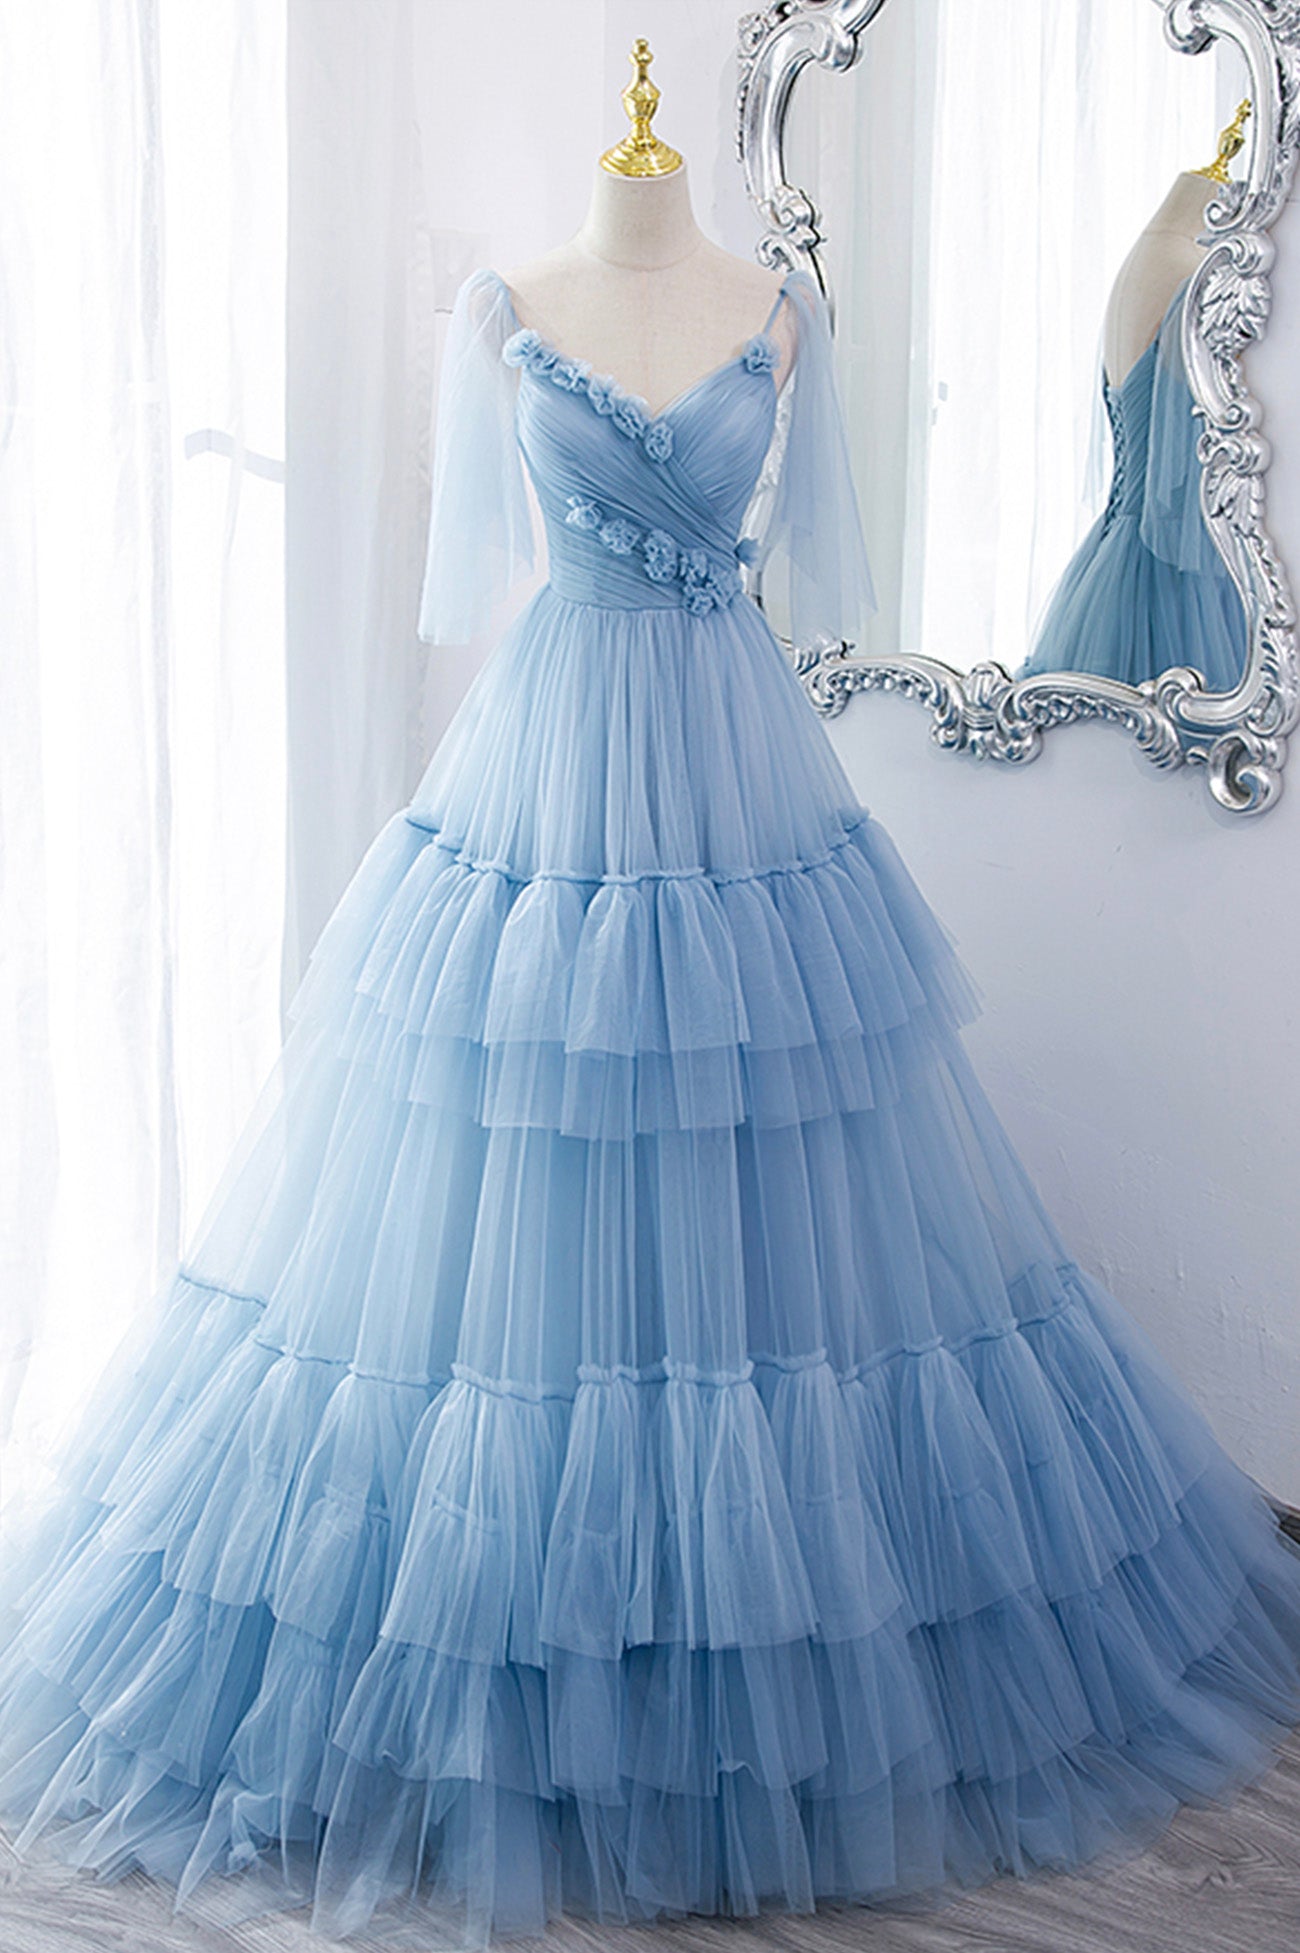 Prom Dressed Ball Gown, A-Line Tulle Long Prom Dresses, V-Neck Spaghetti Strap Long Princess Dresses